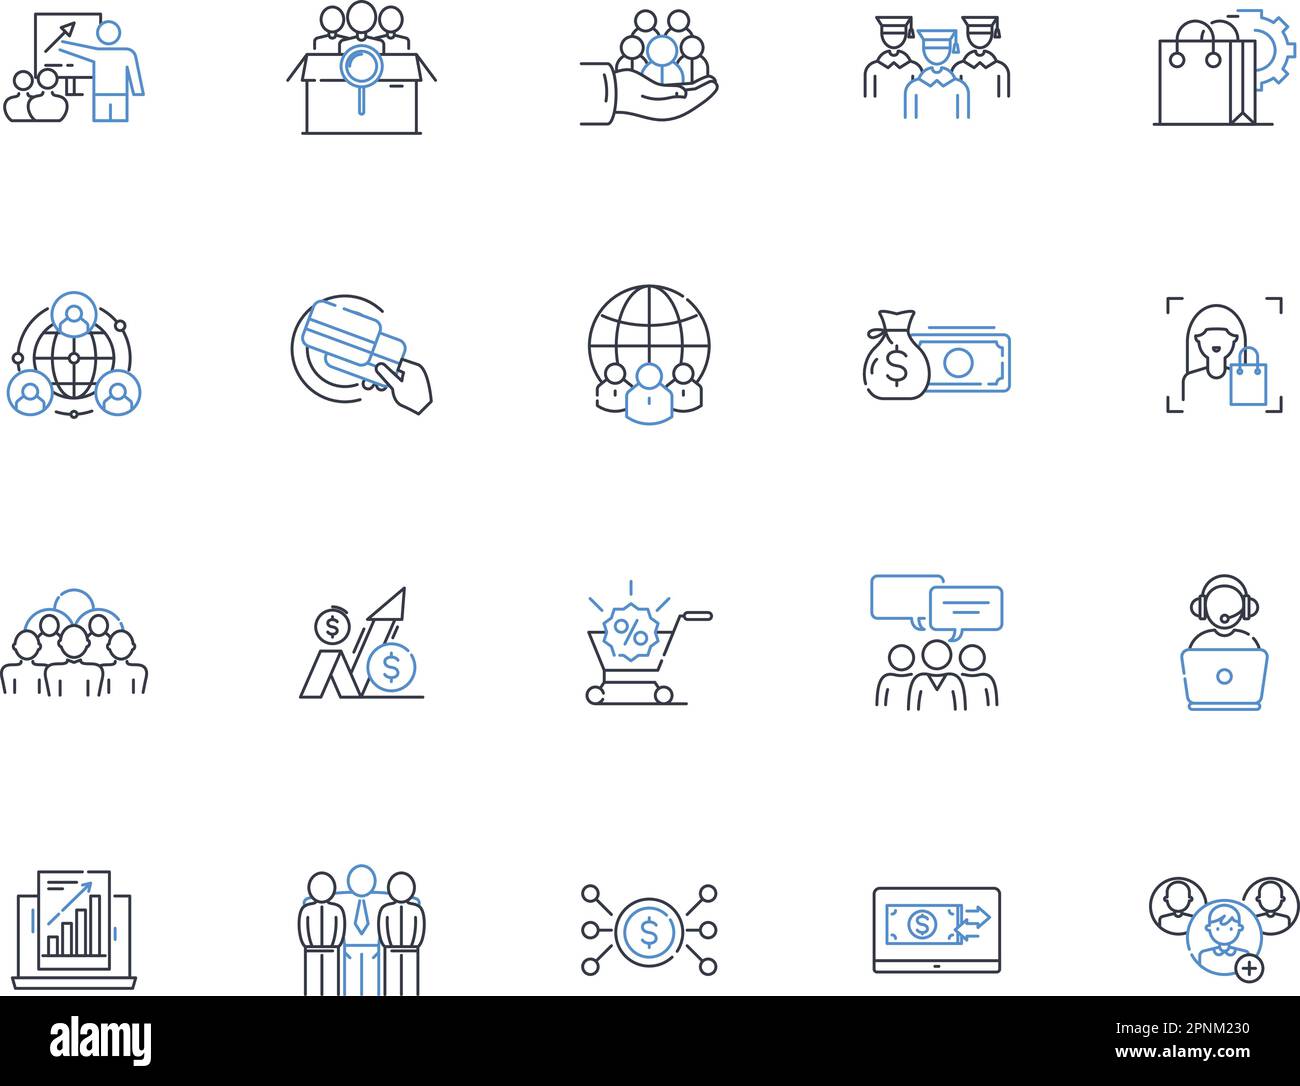 Financial analytics line icons collection. Forecasting, Budgeting, Variance, Optimization, Performance, Valuation, Risk vector and linear illustration Stock Vector